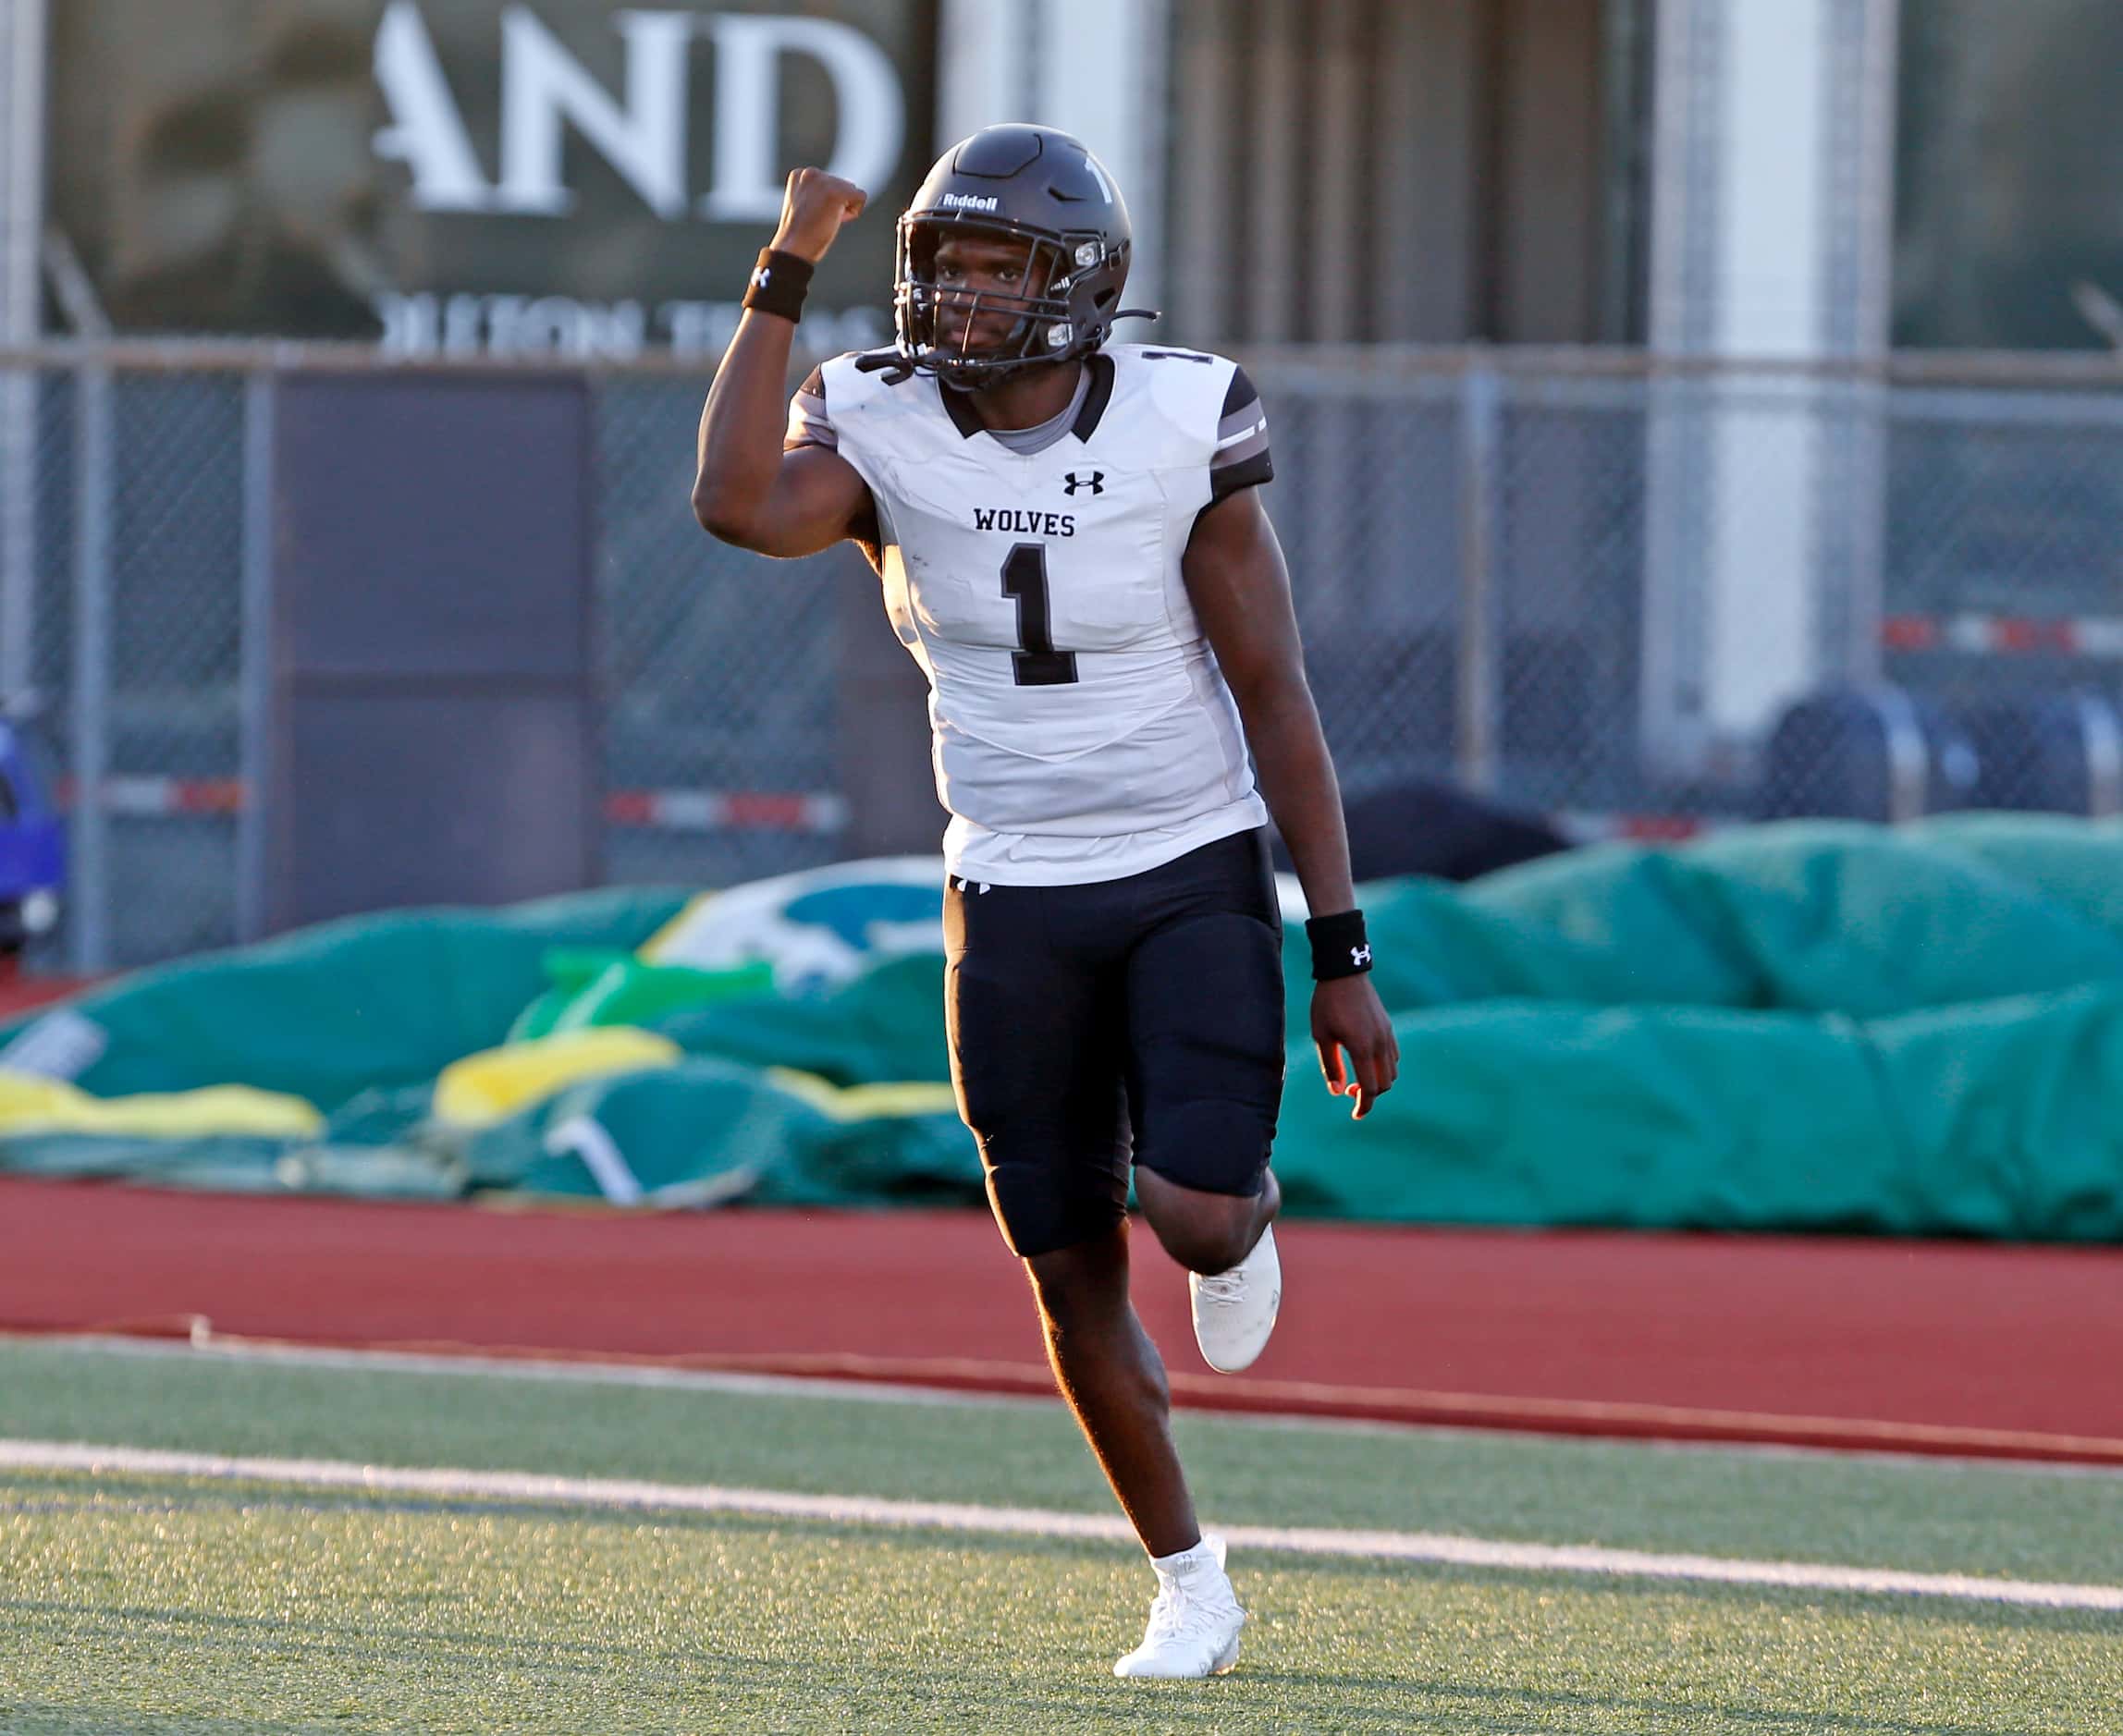 Mansfield Timberview QB Zuric Humes (1) celebrates his touchdown during the first half of a...